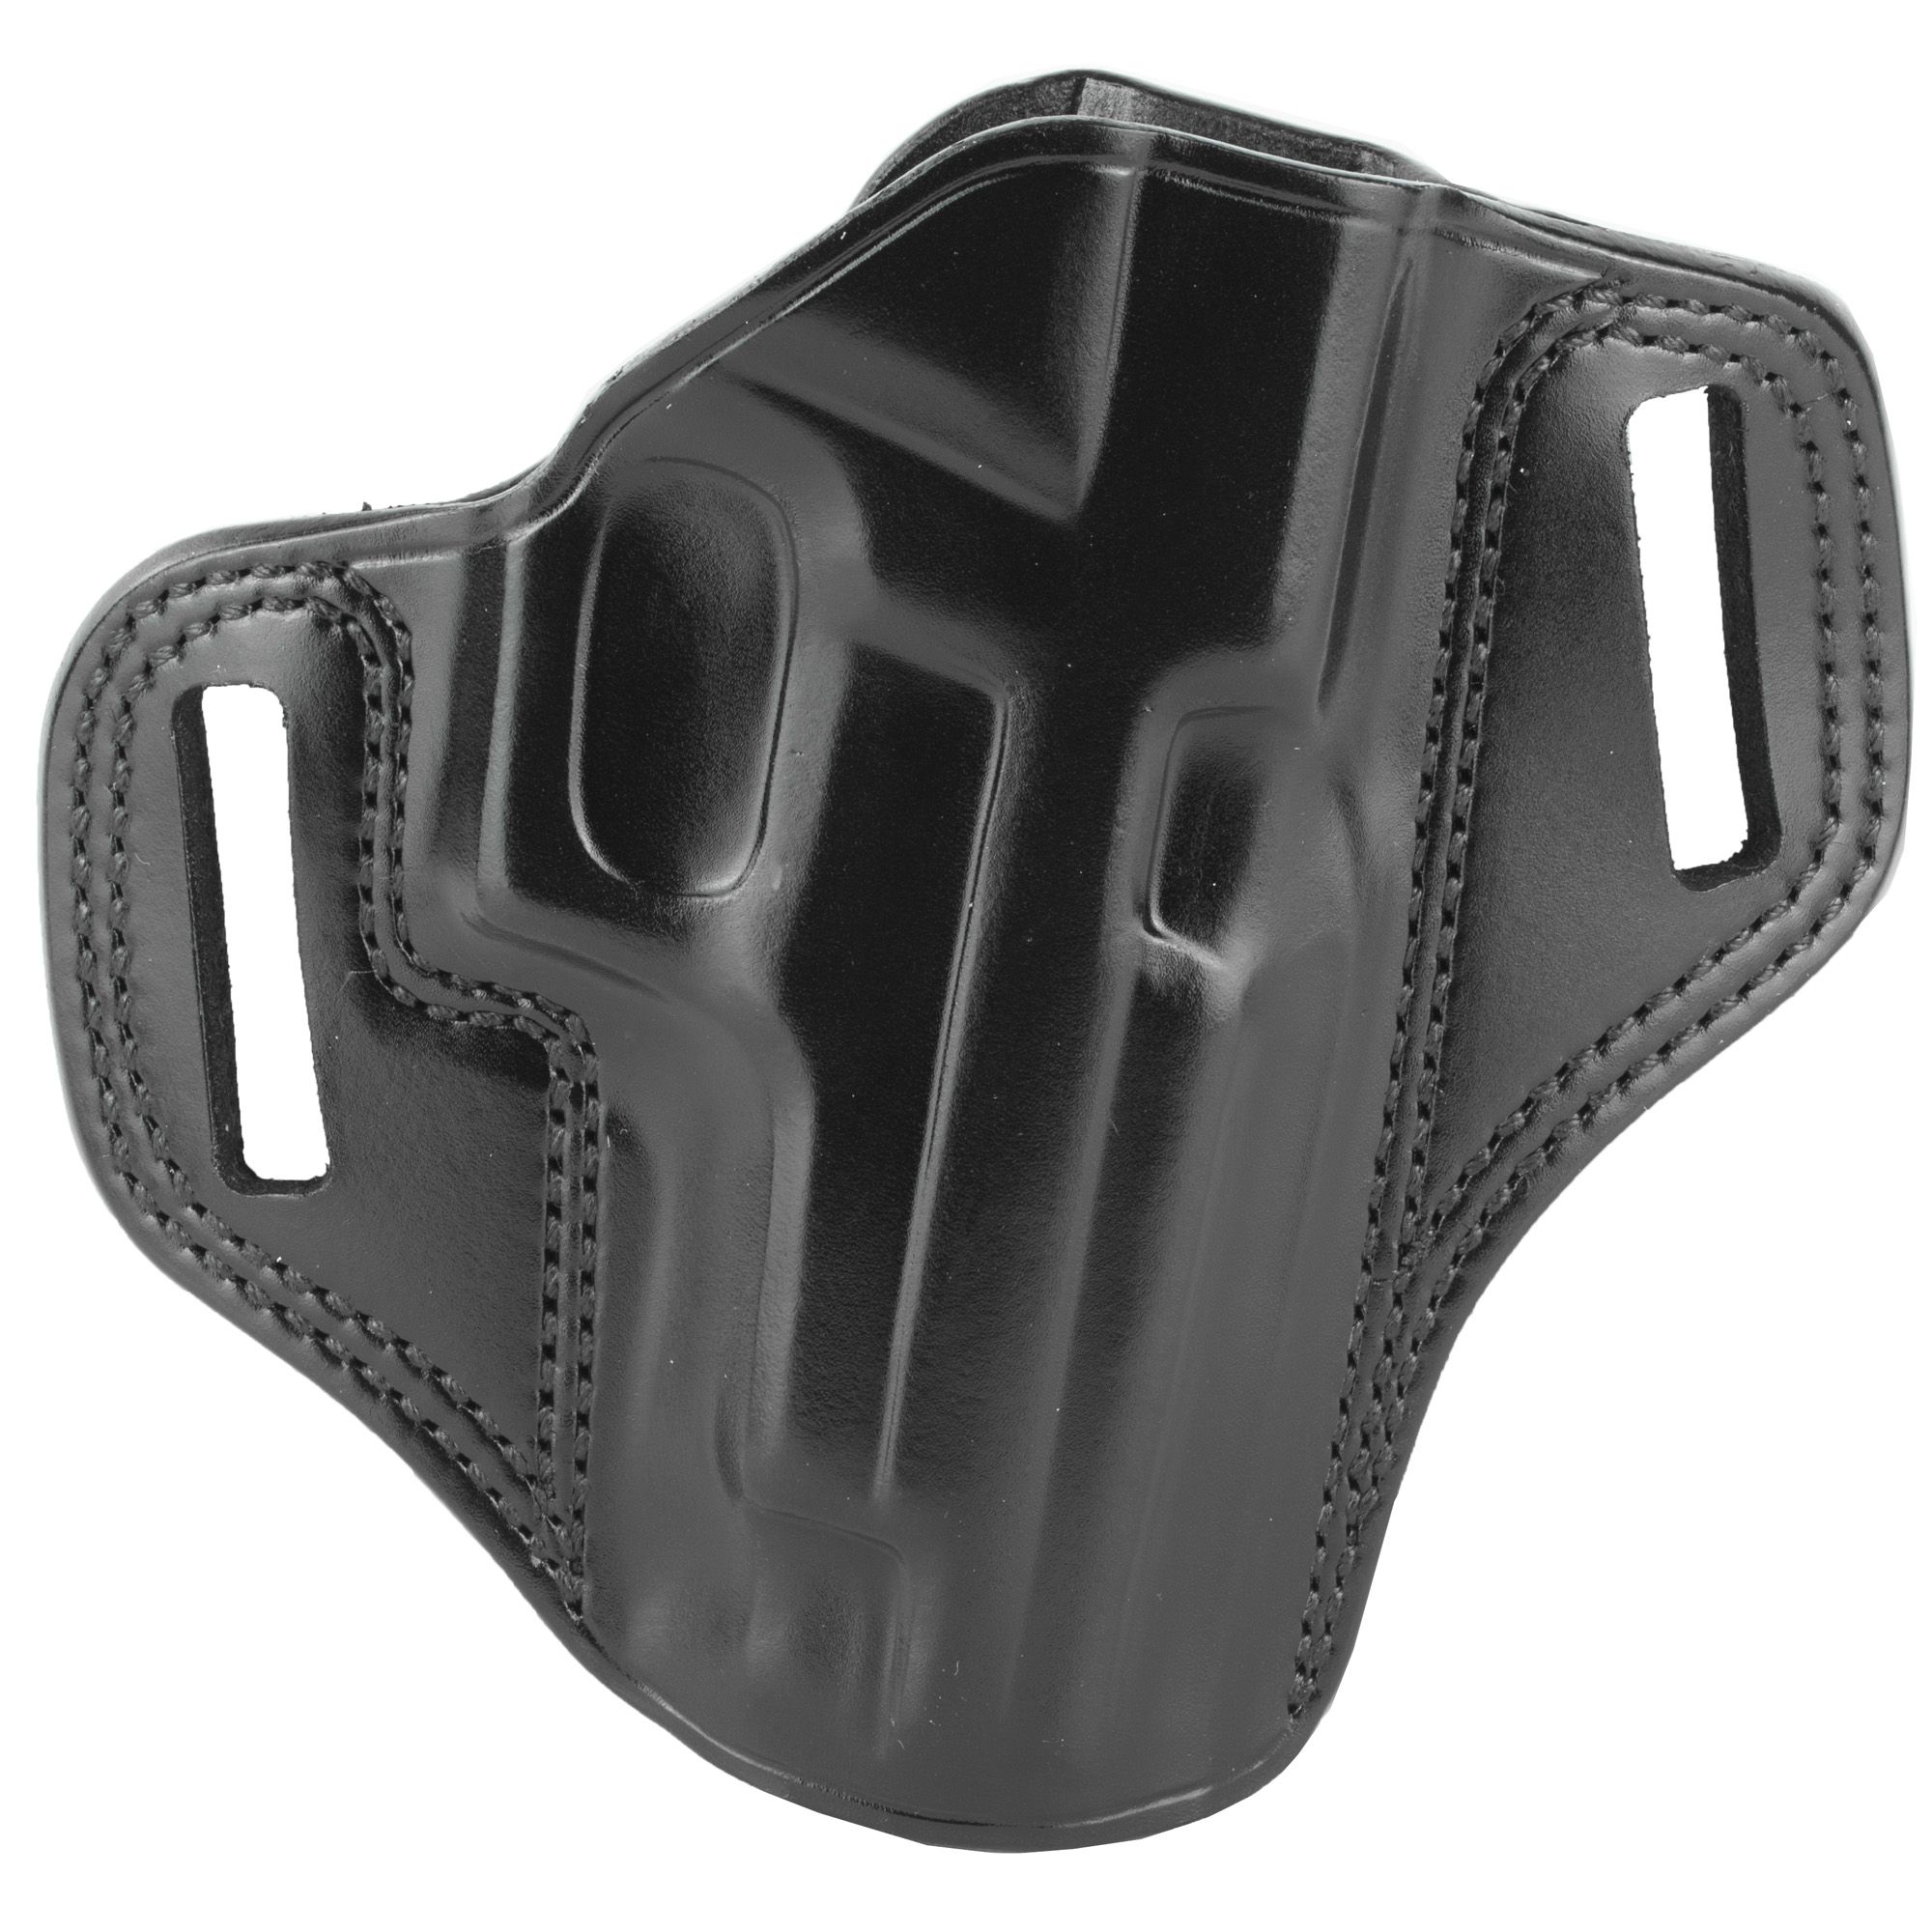 Galco Combat Master Concealment Holster - Right Hand Black Sig P220/: CM248B